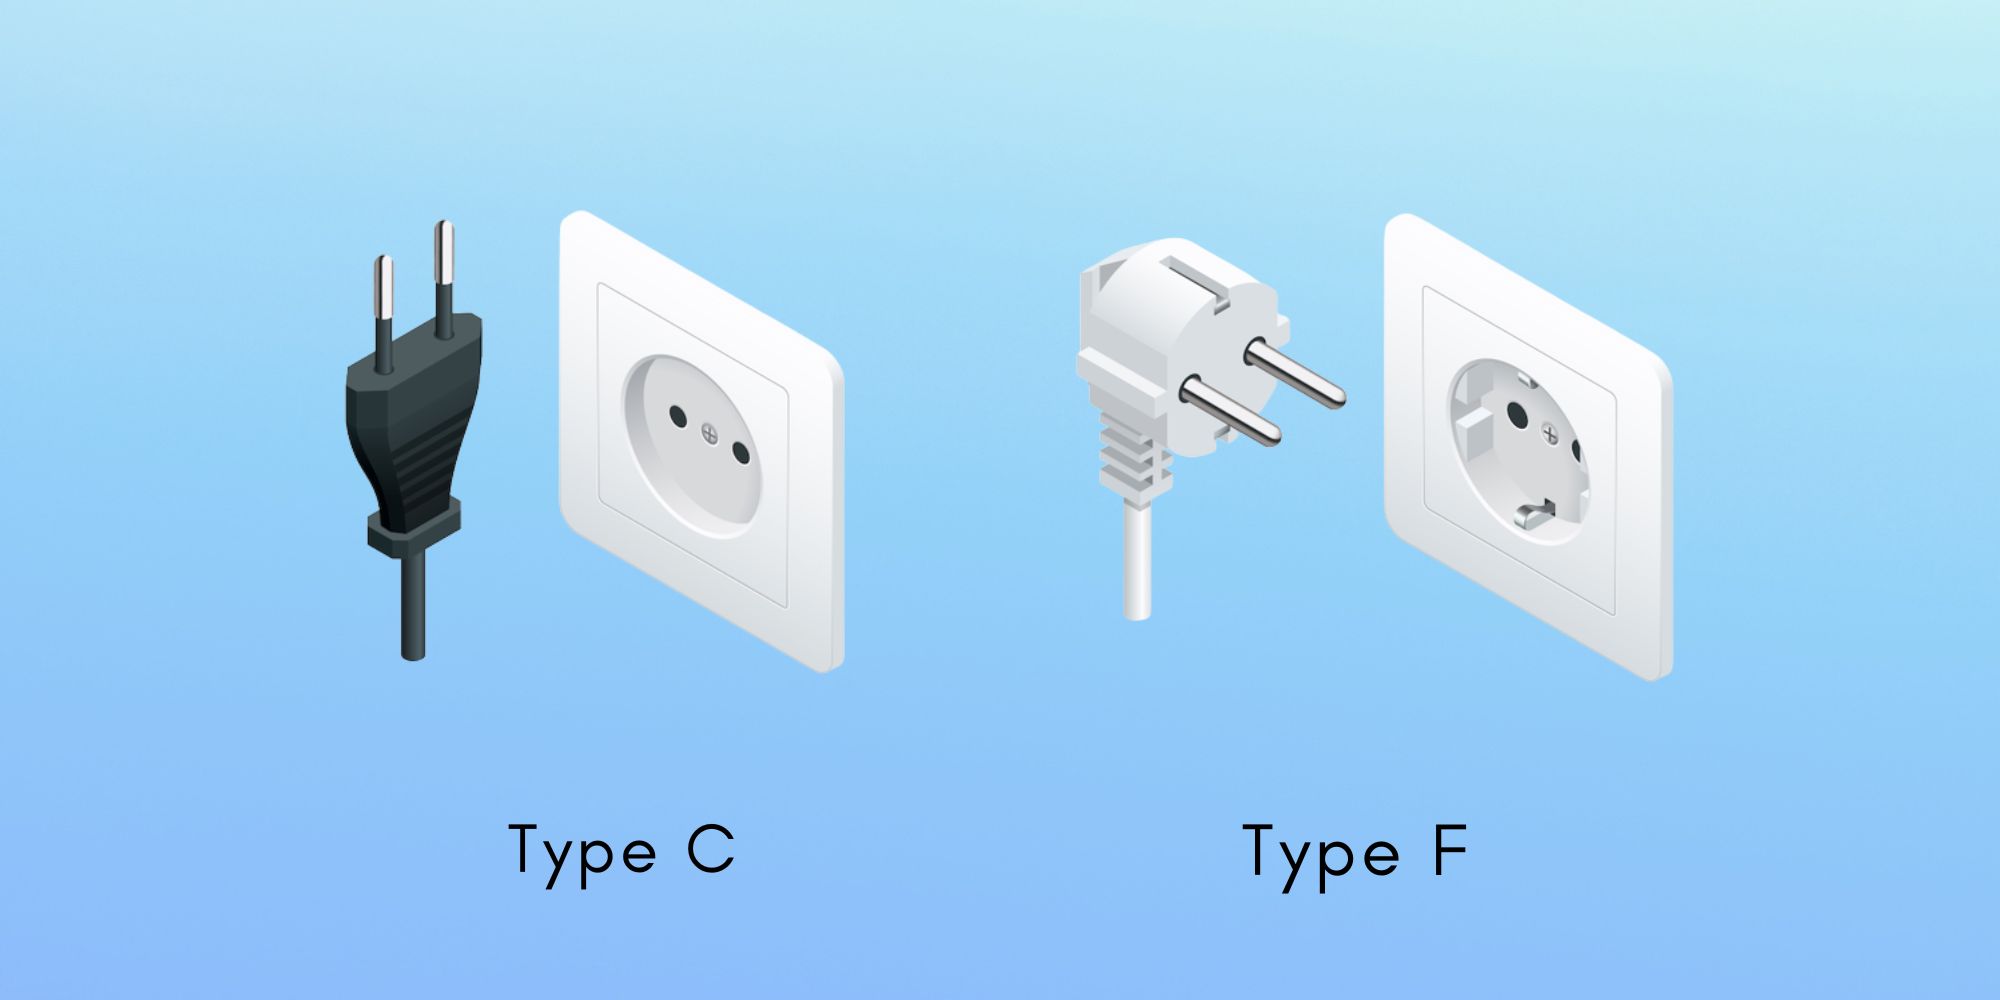 Indonesia Power Plugs and Sockets: Type C and Type F
